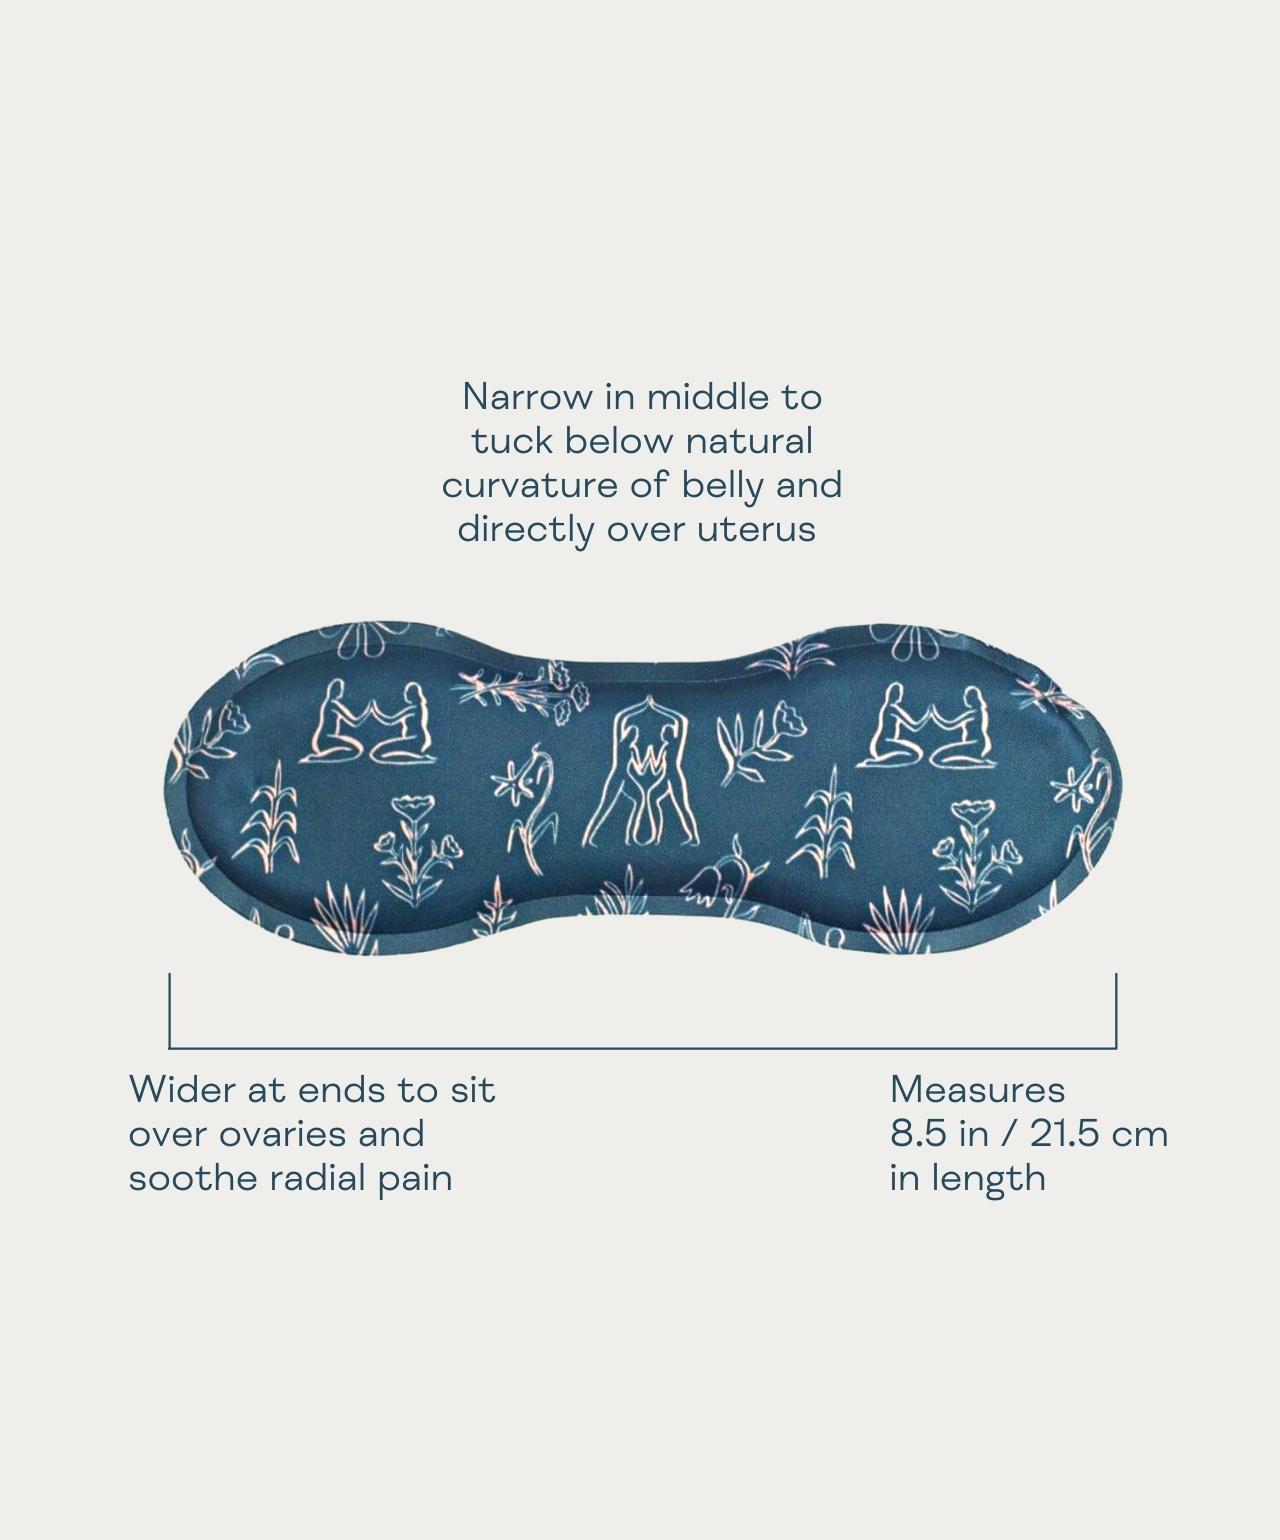 Diagrammed image of uterine ice - heat pack showing 21.5cm length and widened ends to cover ovaries